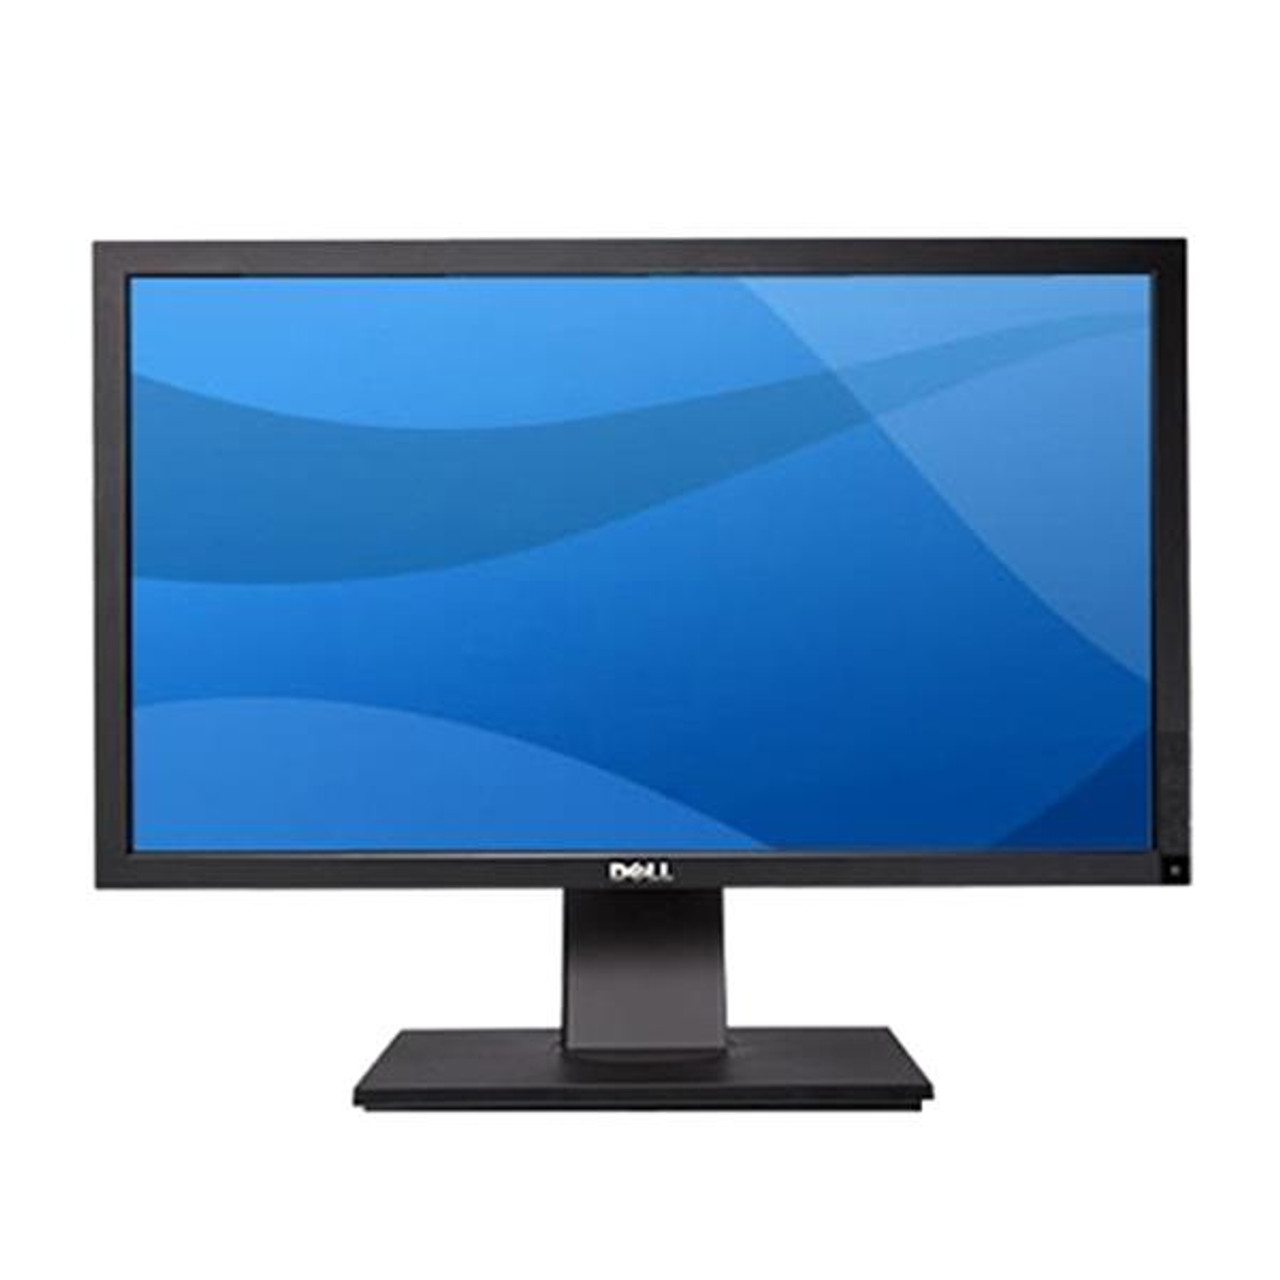 P2211H15025 - Dell 21.5-inch Widescreen FullHD 1920 x 1080 at 60Hz LCD Monitor